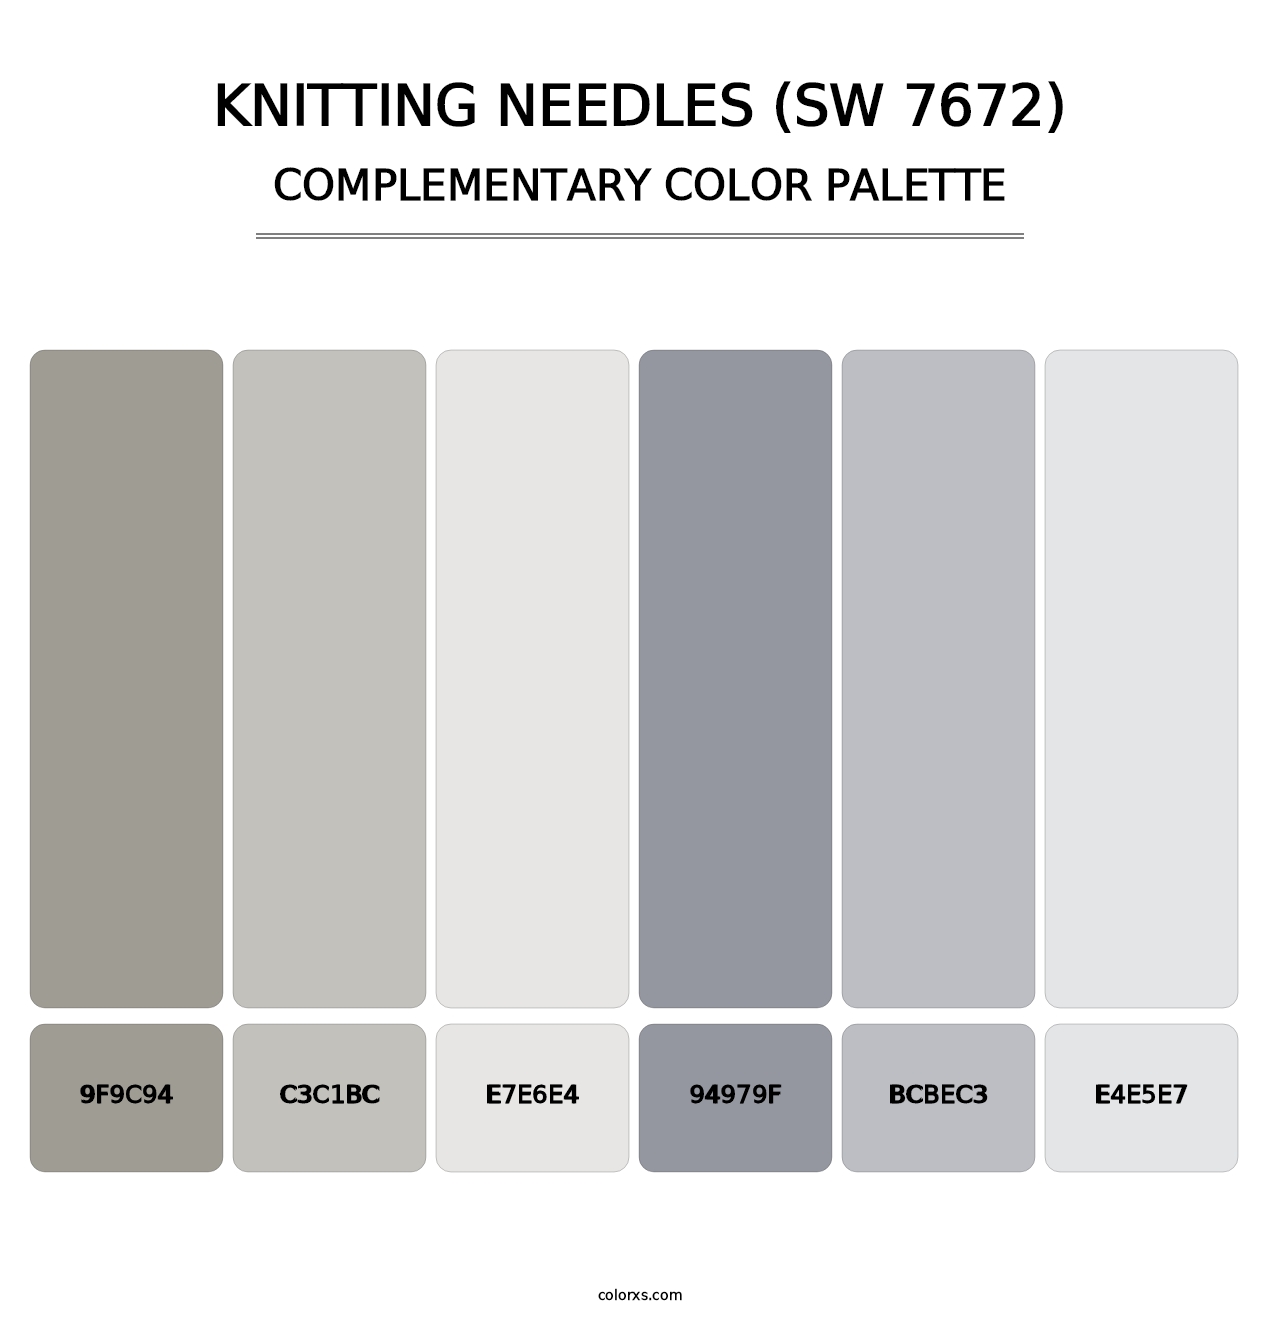 Knitting Needles (SW 7672) - Complementary Color Palette